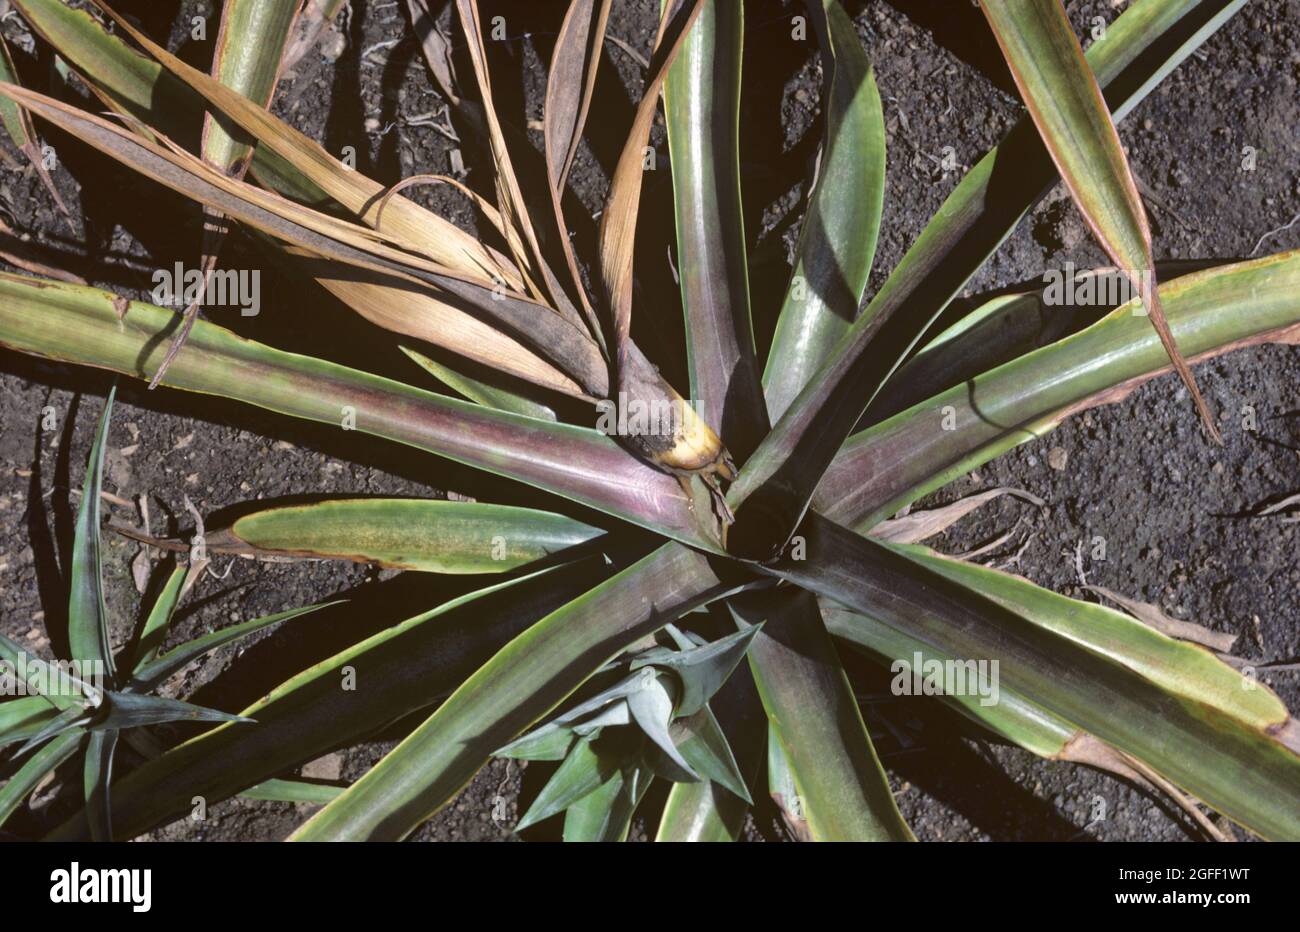 Heart rot (Phytophthora nicotianae var. parasitica) yellowing discolouration symptoms and dead growing point in young pineapple plants, South Africa Stock Photo